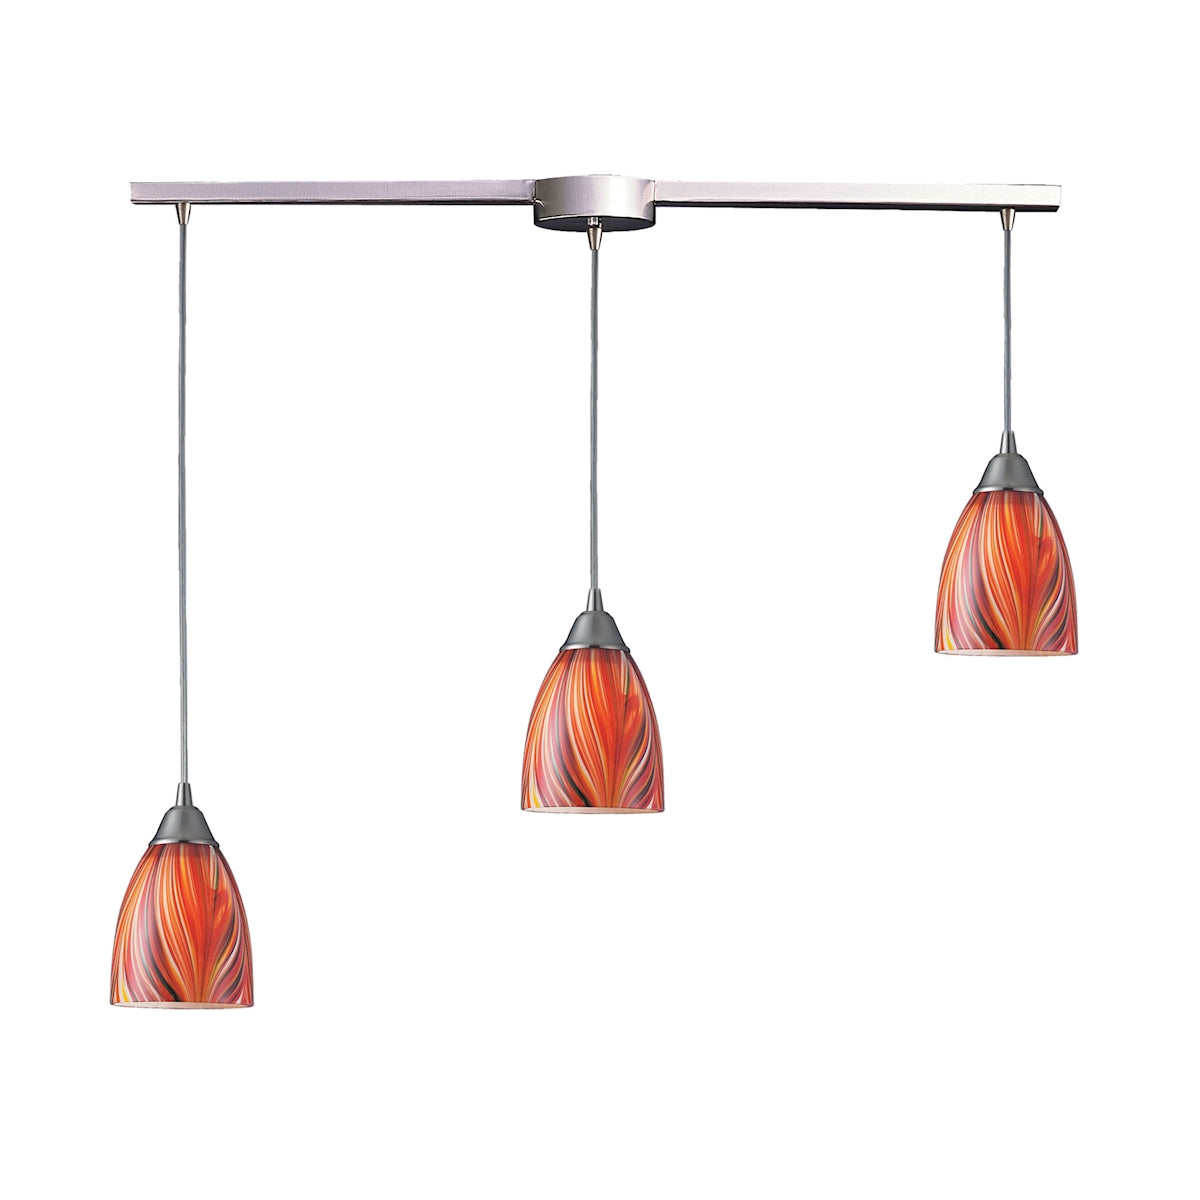 ELK Lighting 416-3L-M Arco Baleno 3-Light Linear Pendant Fixture in Satin Nickel with Multi-colored Glass